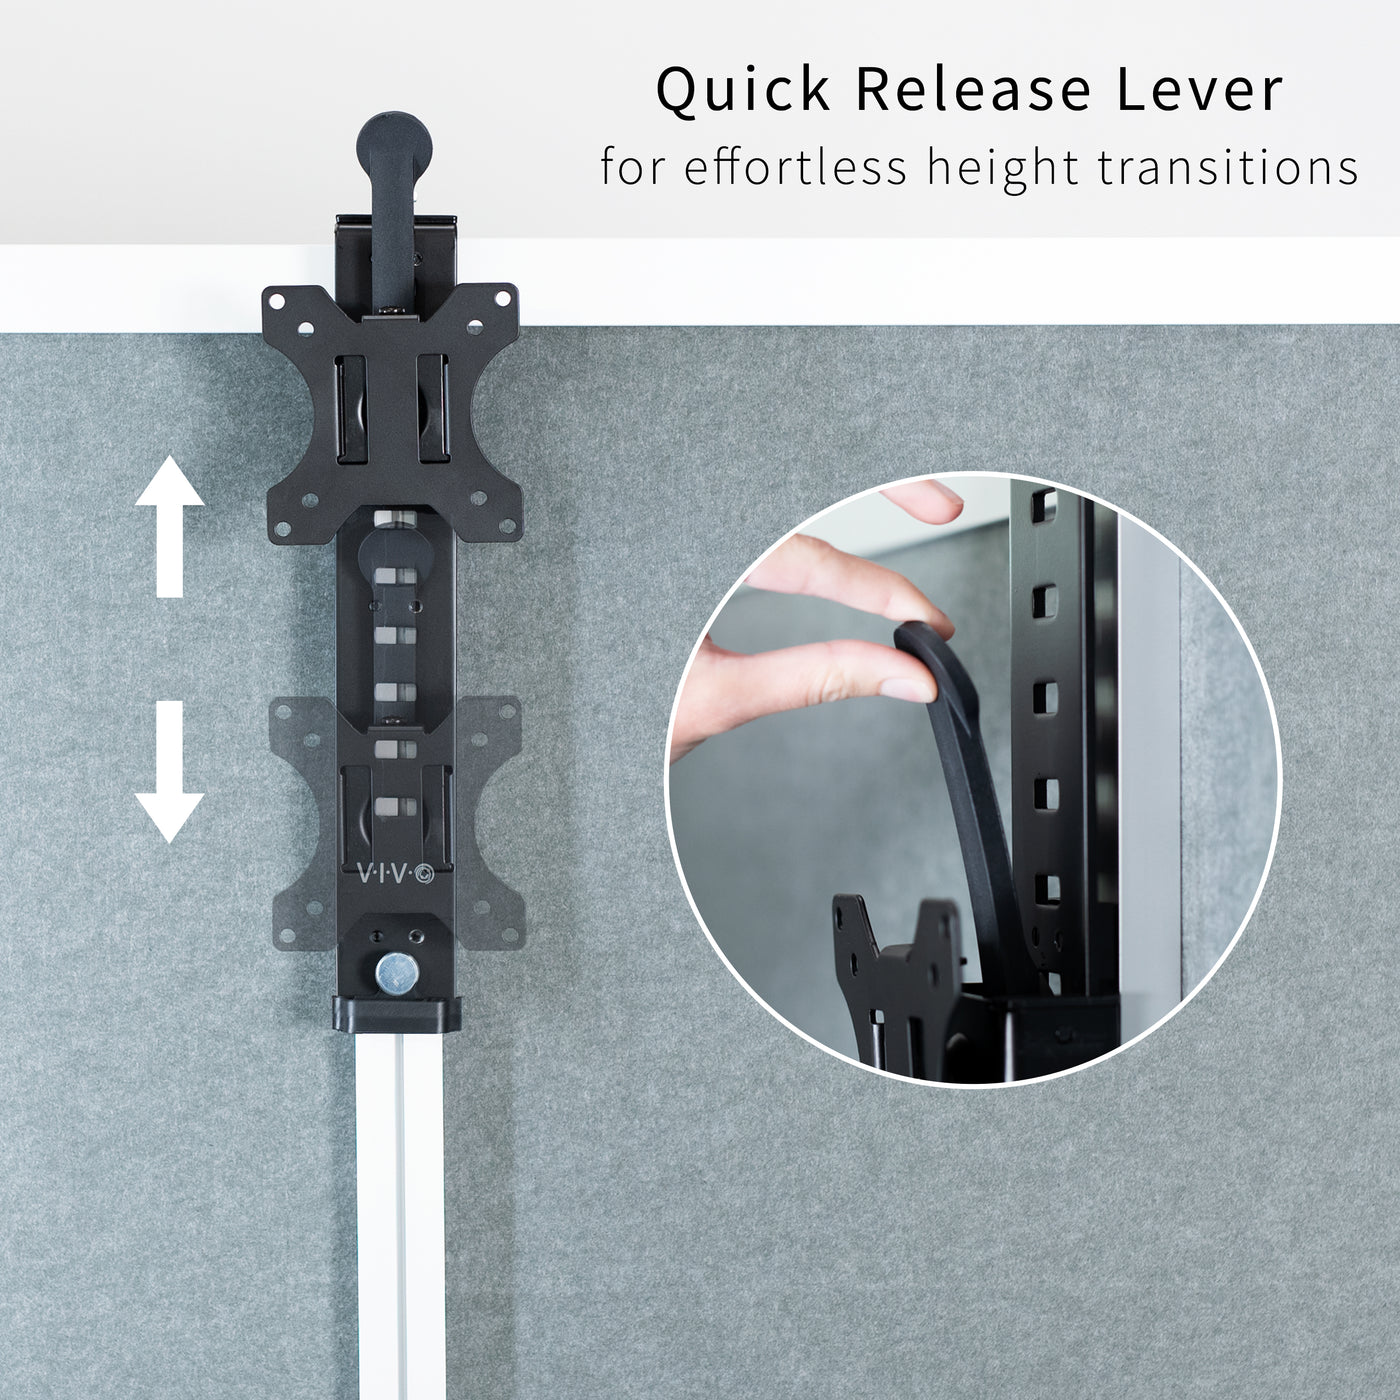 Quick release lever allows for smooth and effortless height adjustments.